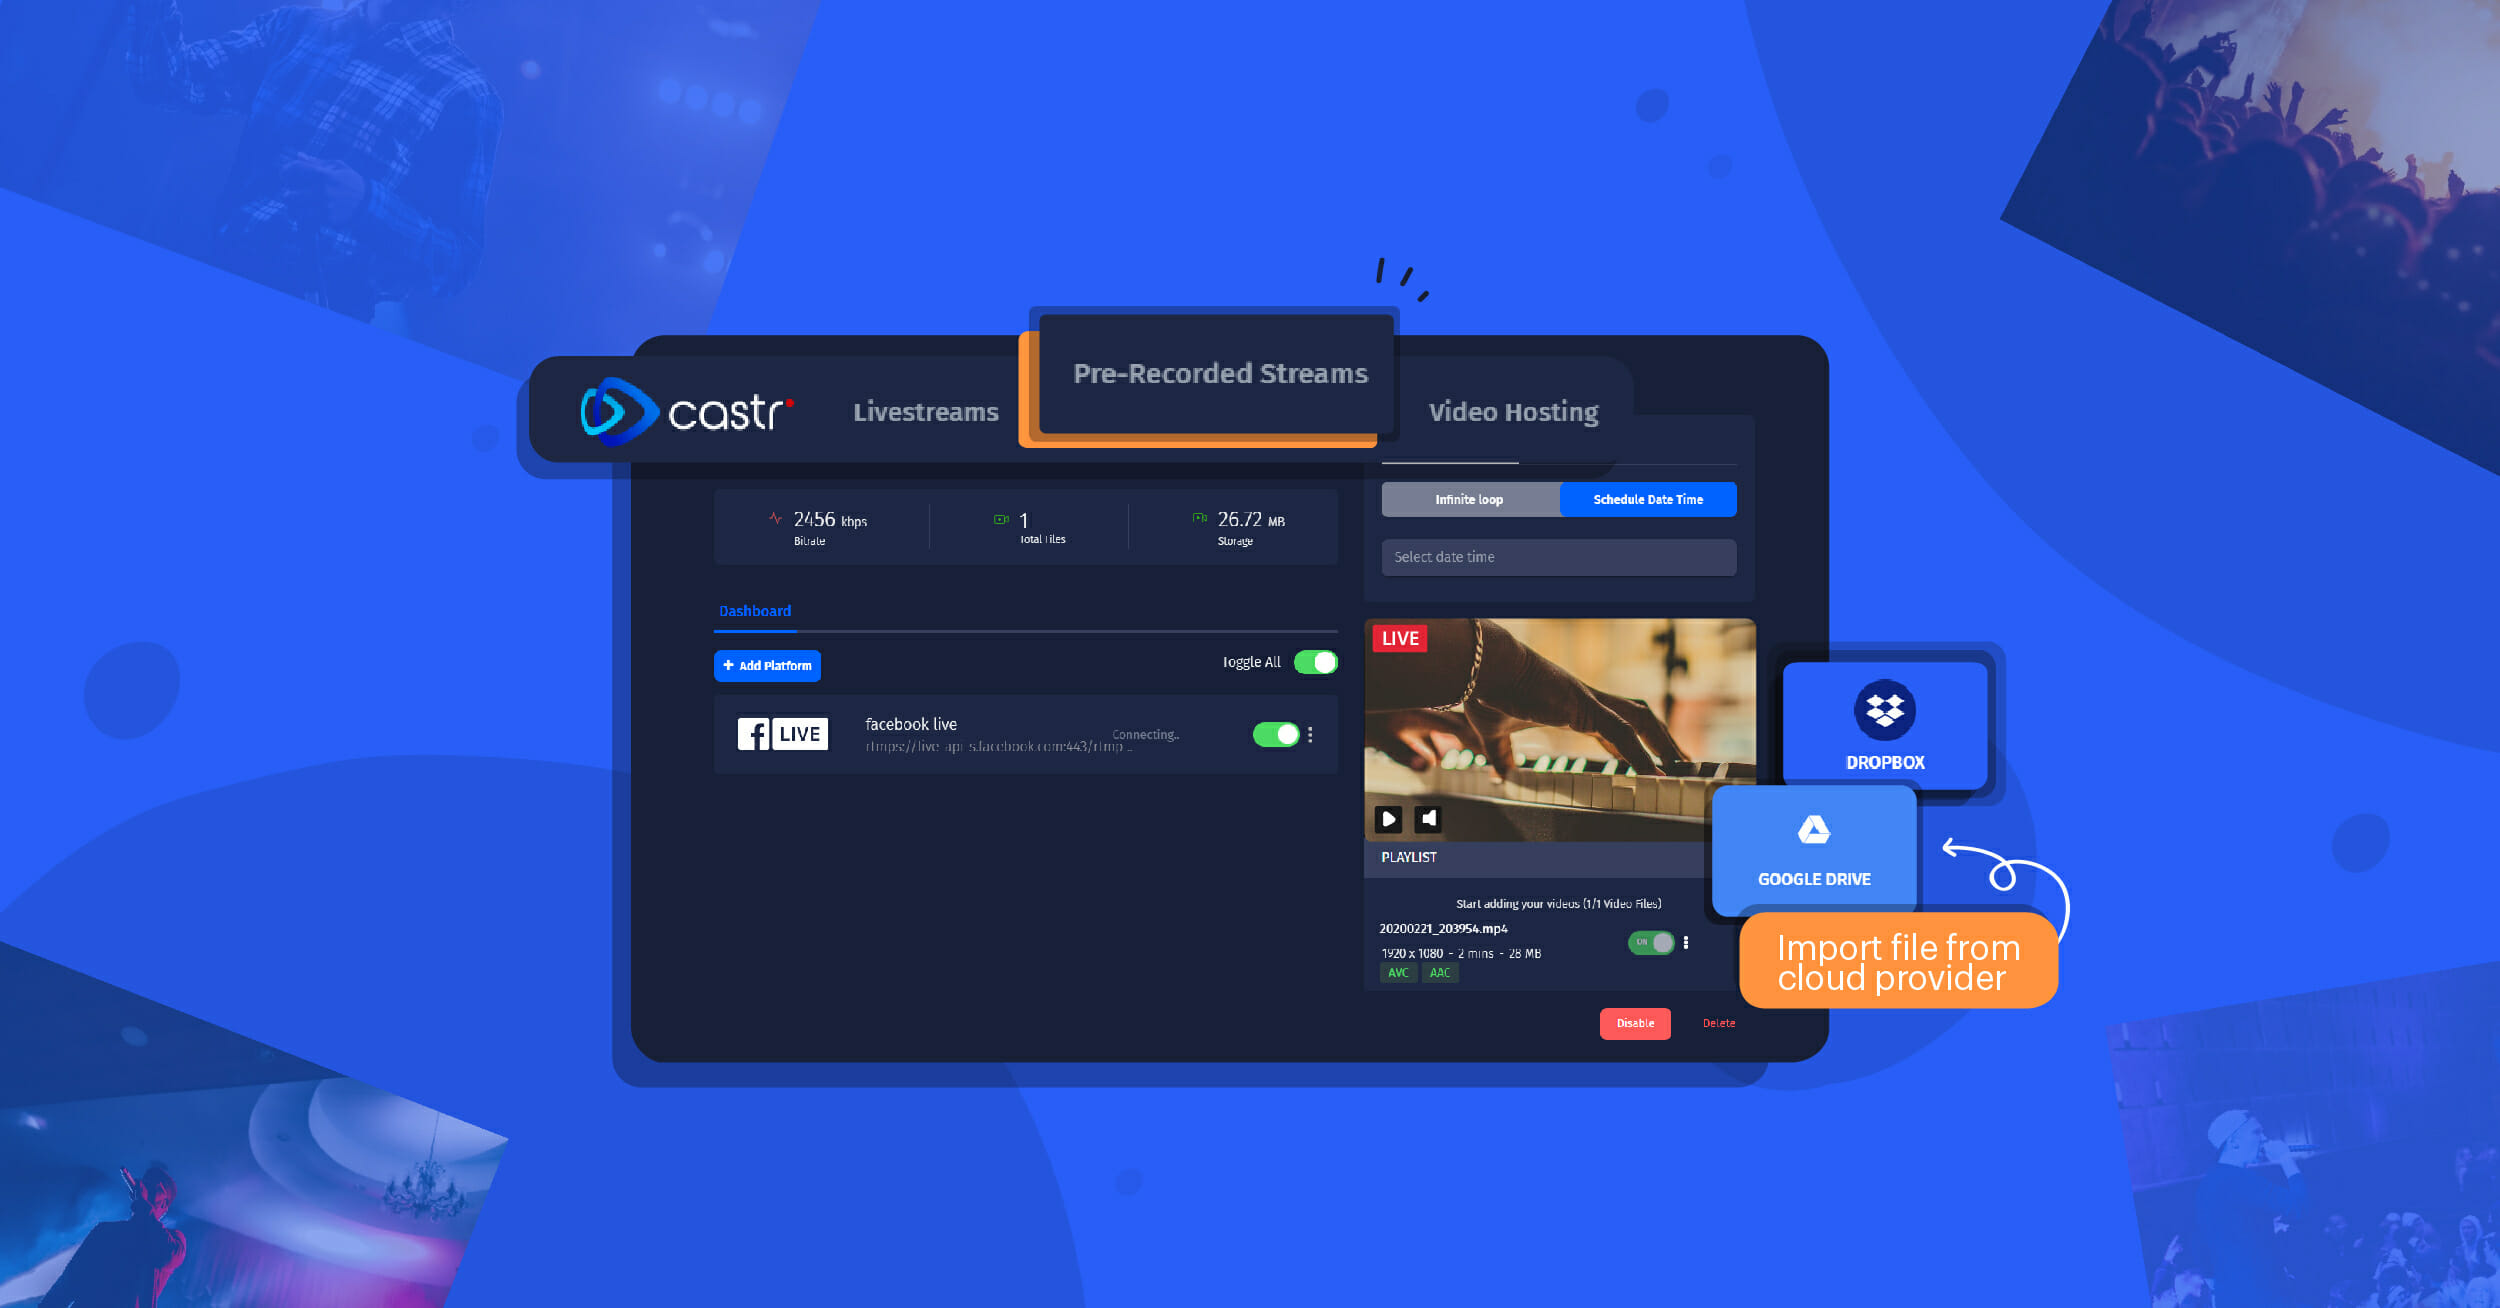 Product Update: Stream Pre-recorded Videos in Castr’s New Tab